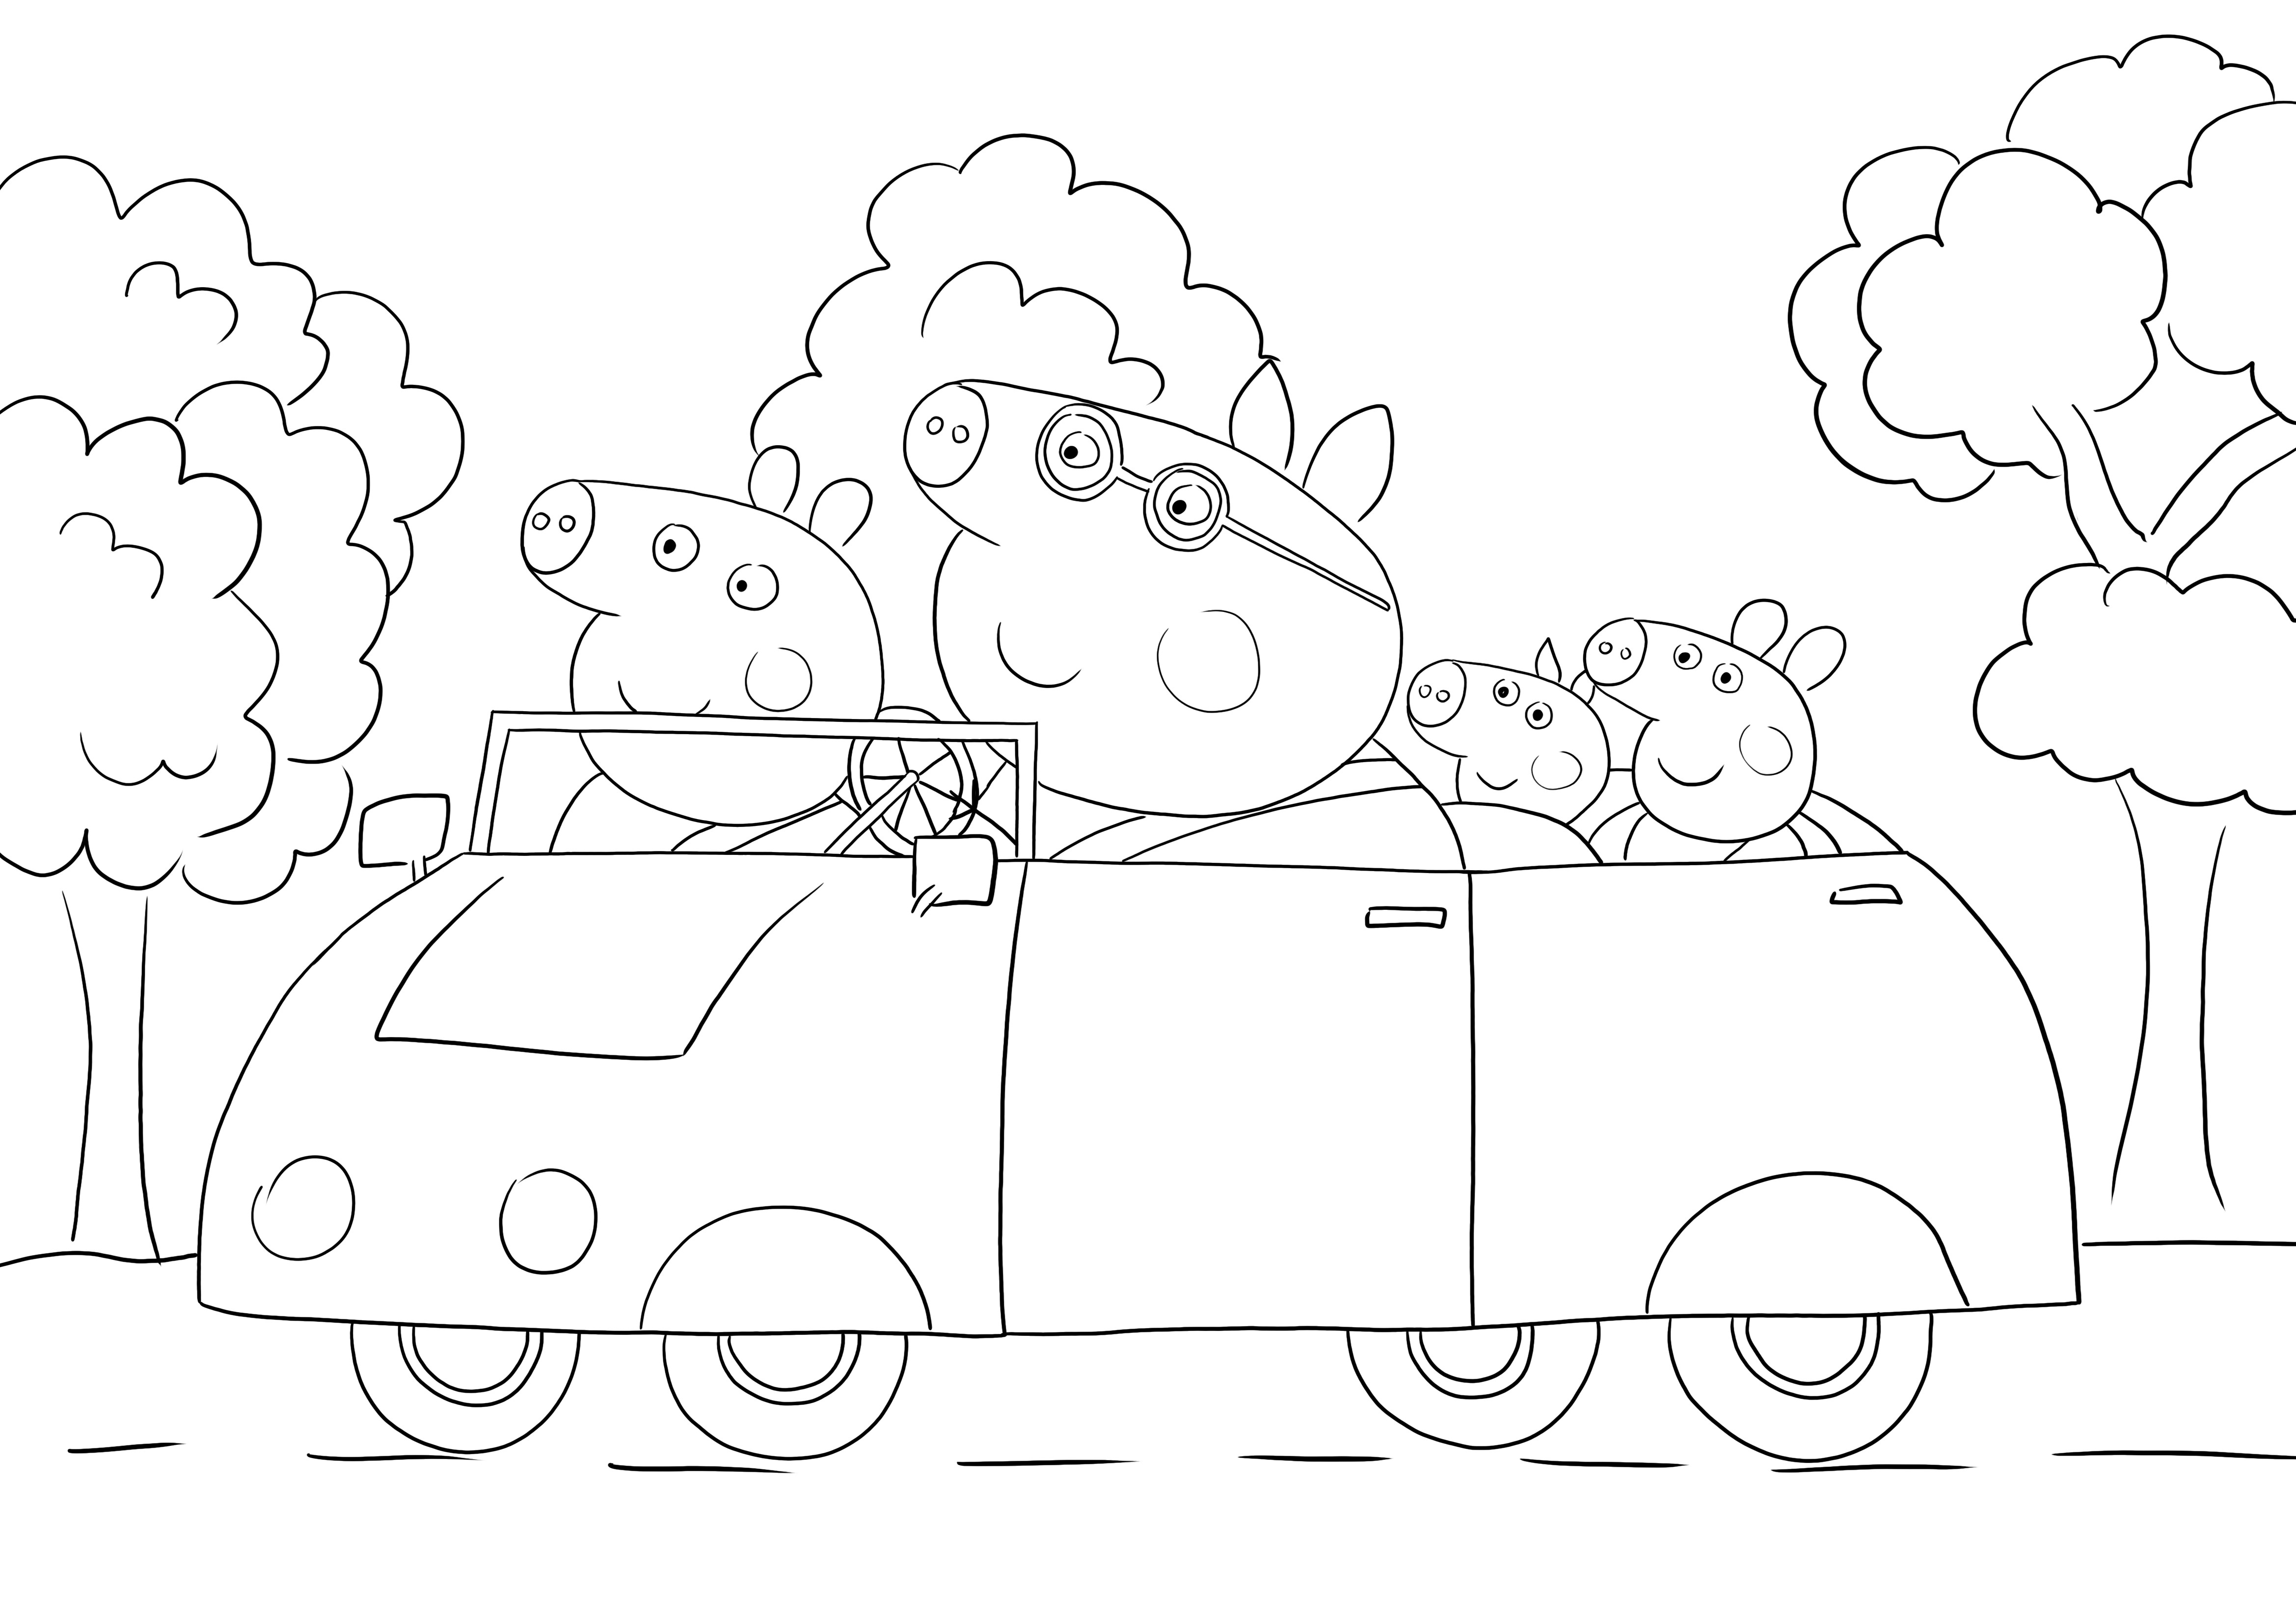 Peppa and family going on a car ride-free printable page to color for kids